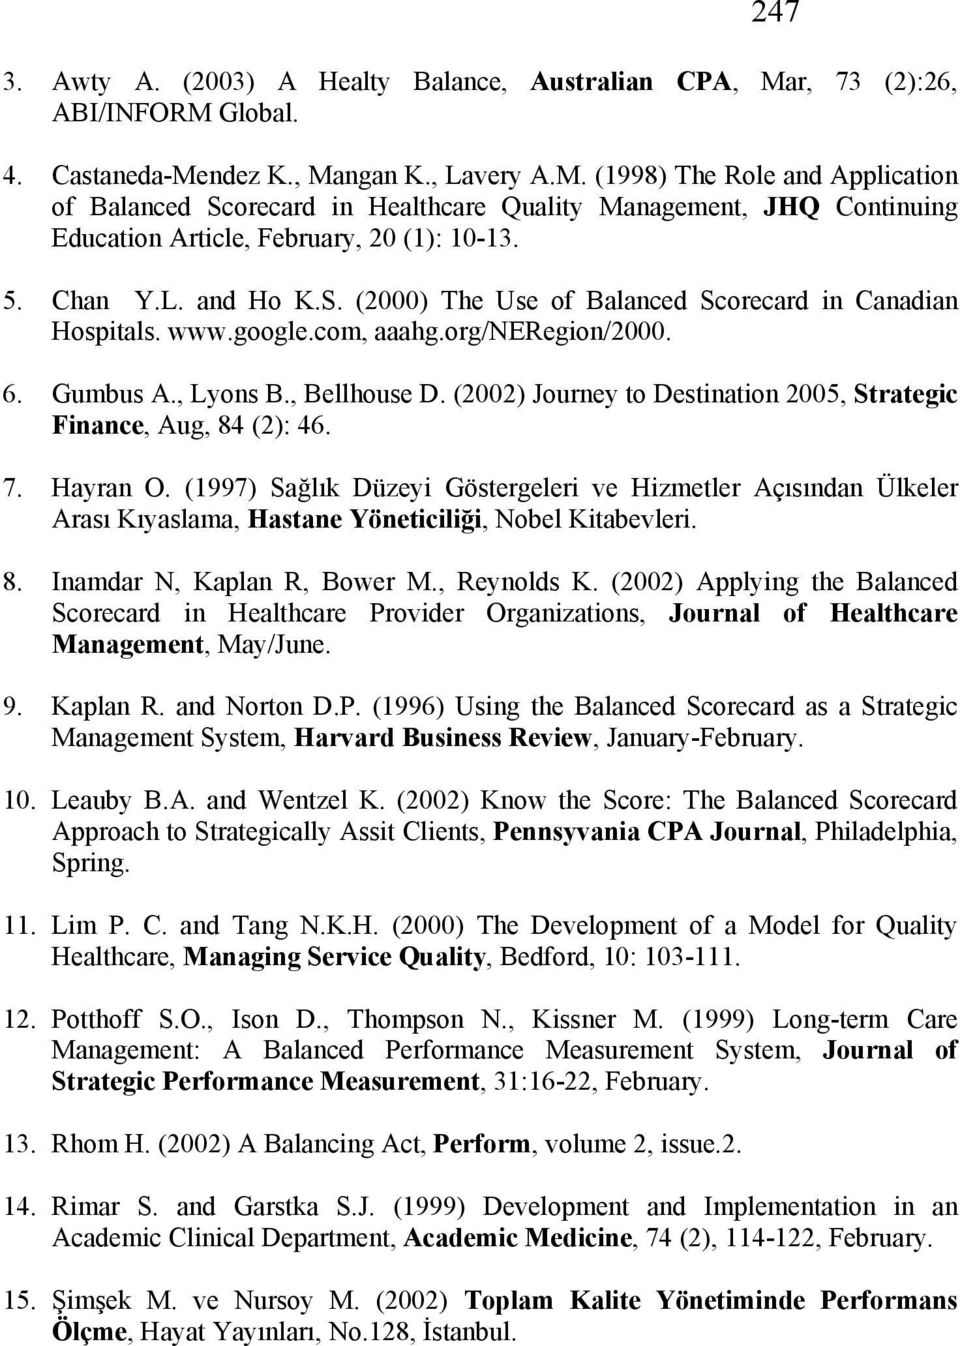 5. Chan Y.L. and Ho K.S. (2000) The Use of Balanced Scorecard in Canadian Hospitals. www.google.com, aaahg.org/neregion/2000. 6. Gumbus A., Lyons B., Bellhouse D.